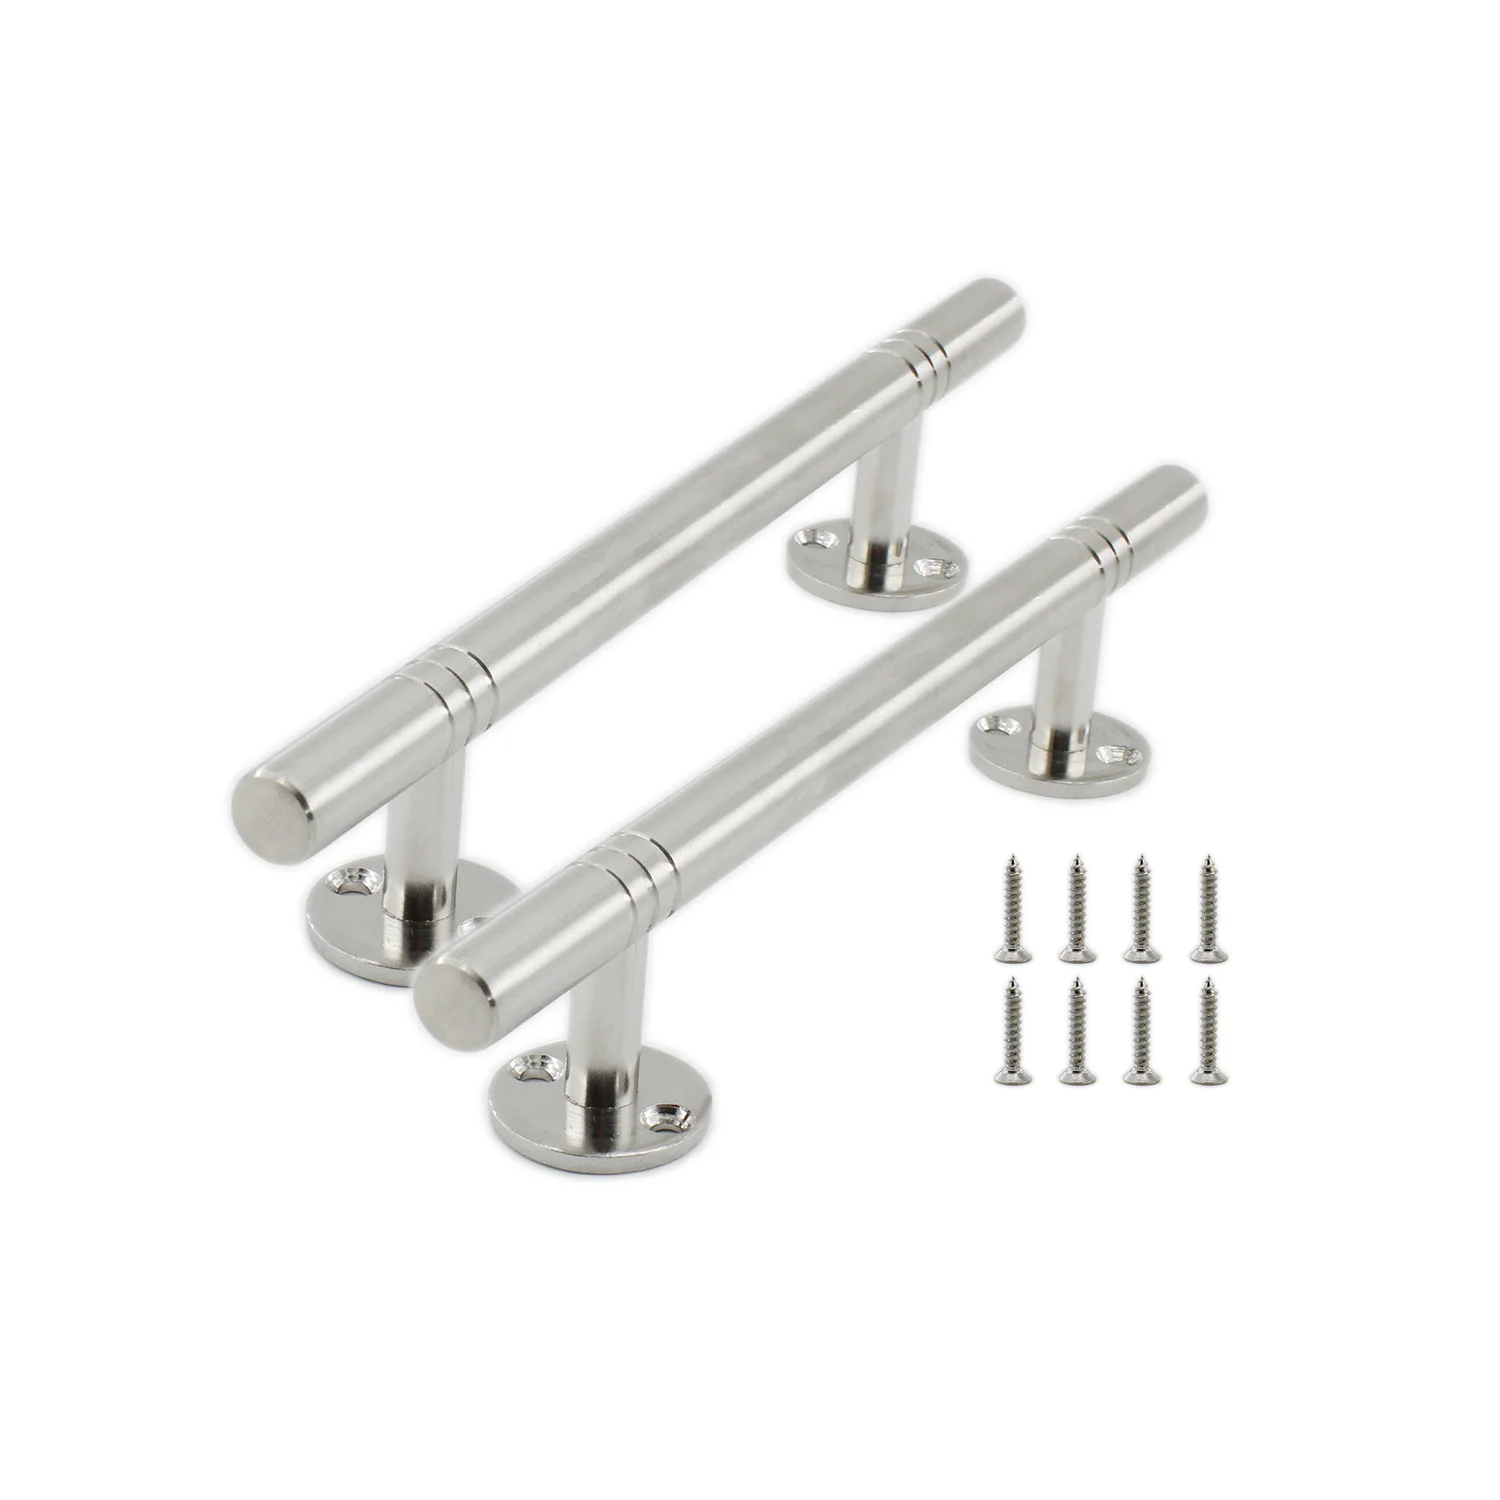 

Stainless Steel Cabinet Handle,Heavy Duty Brushed Nickel Handle Pulls for Furniture Drawer Dresser Bathroom Cabinets with Screws